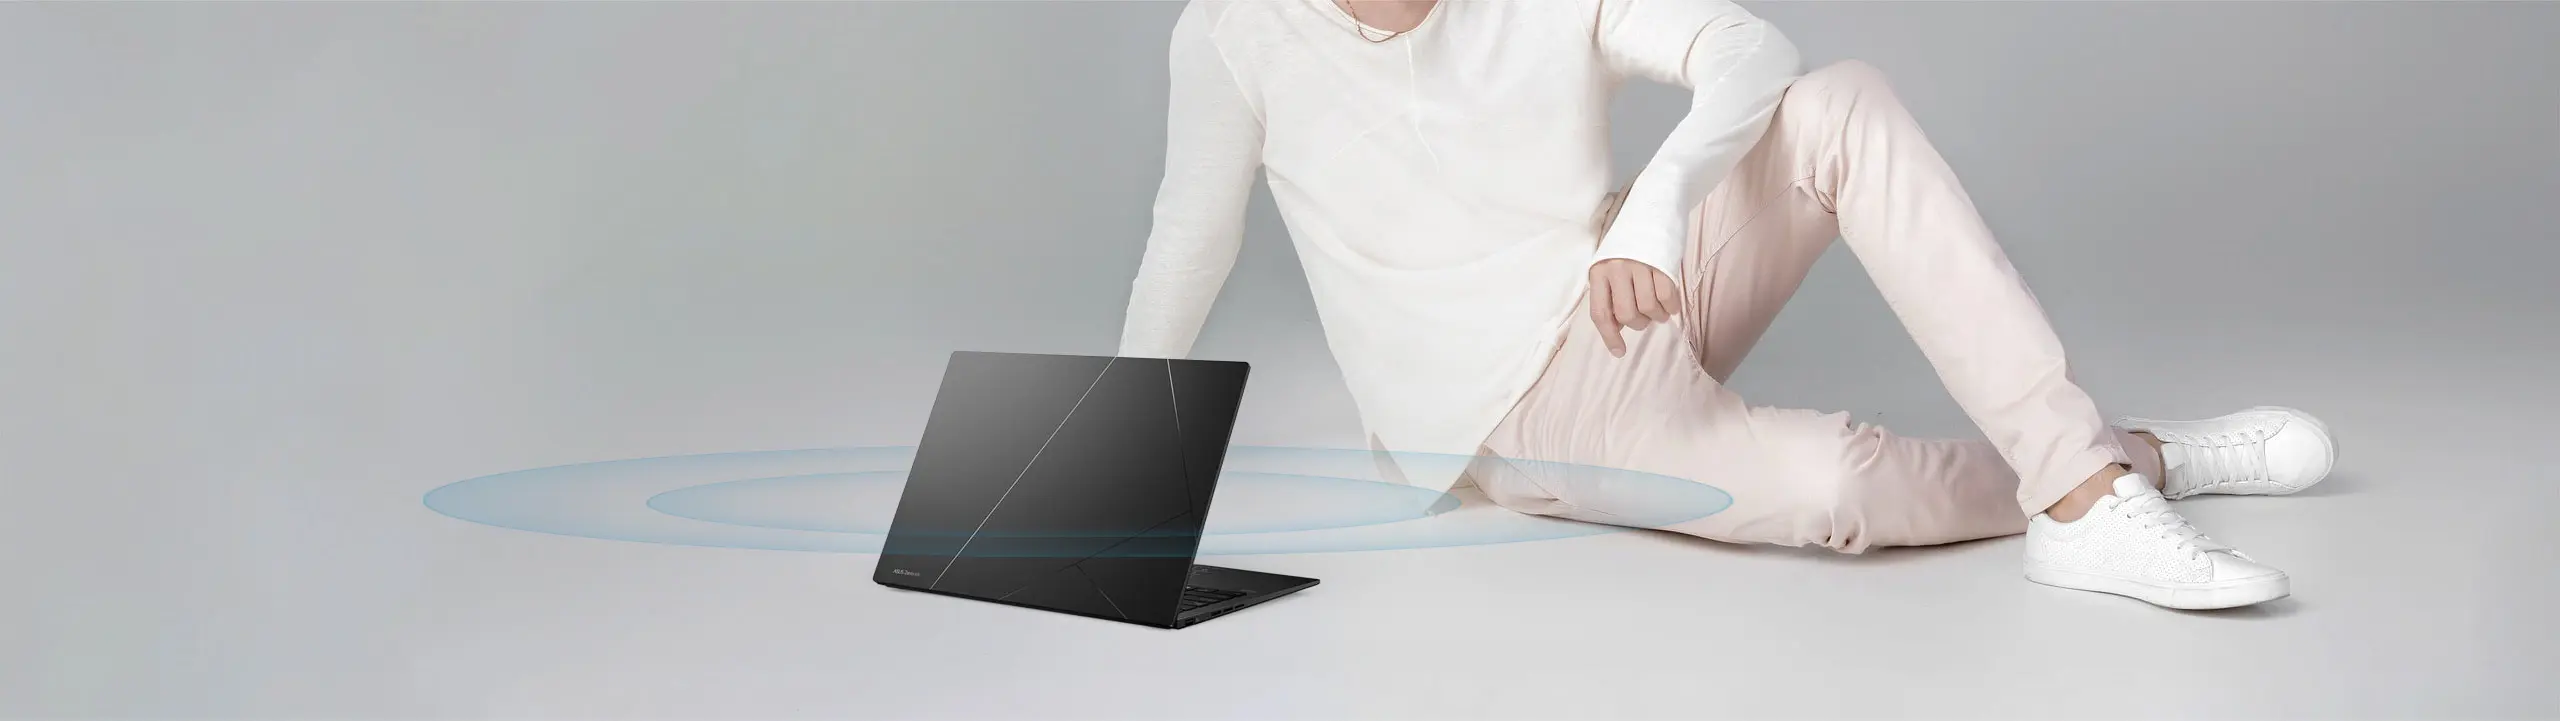 Zenbook 14 OLED laptop is placed on the floor next to a man. The laptop is emmiting sound waves.